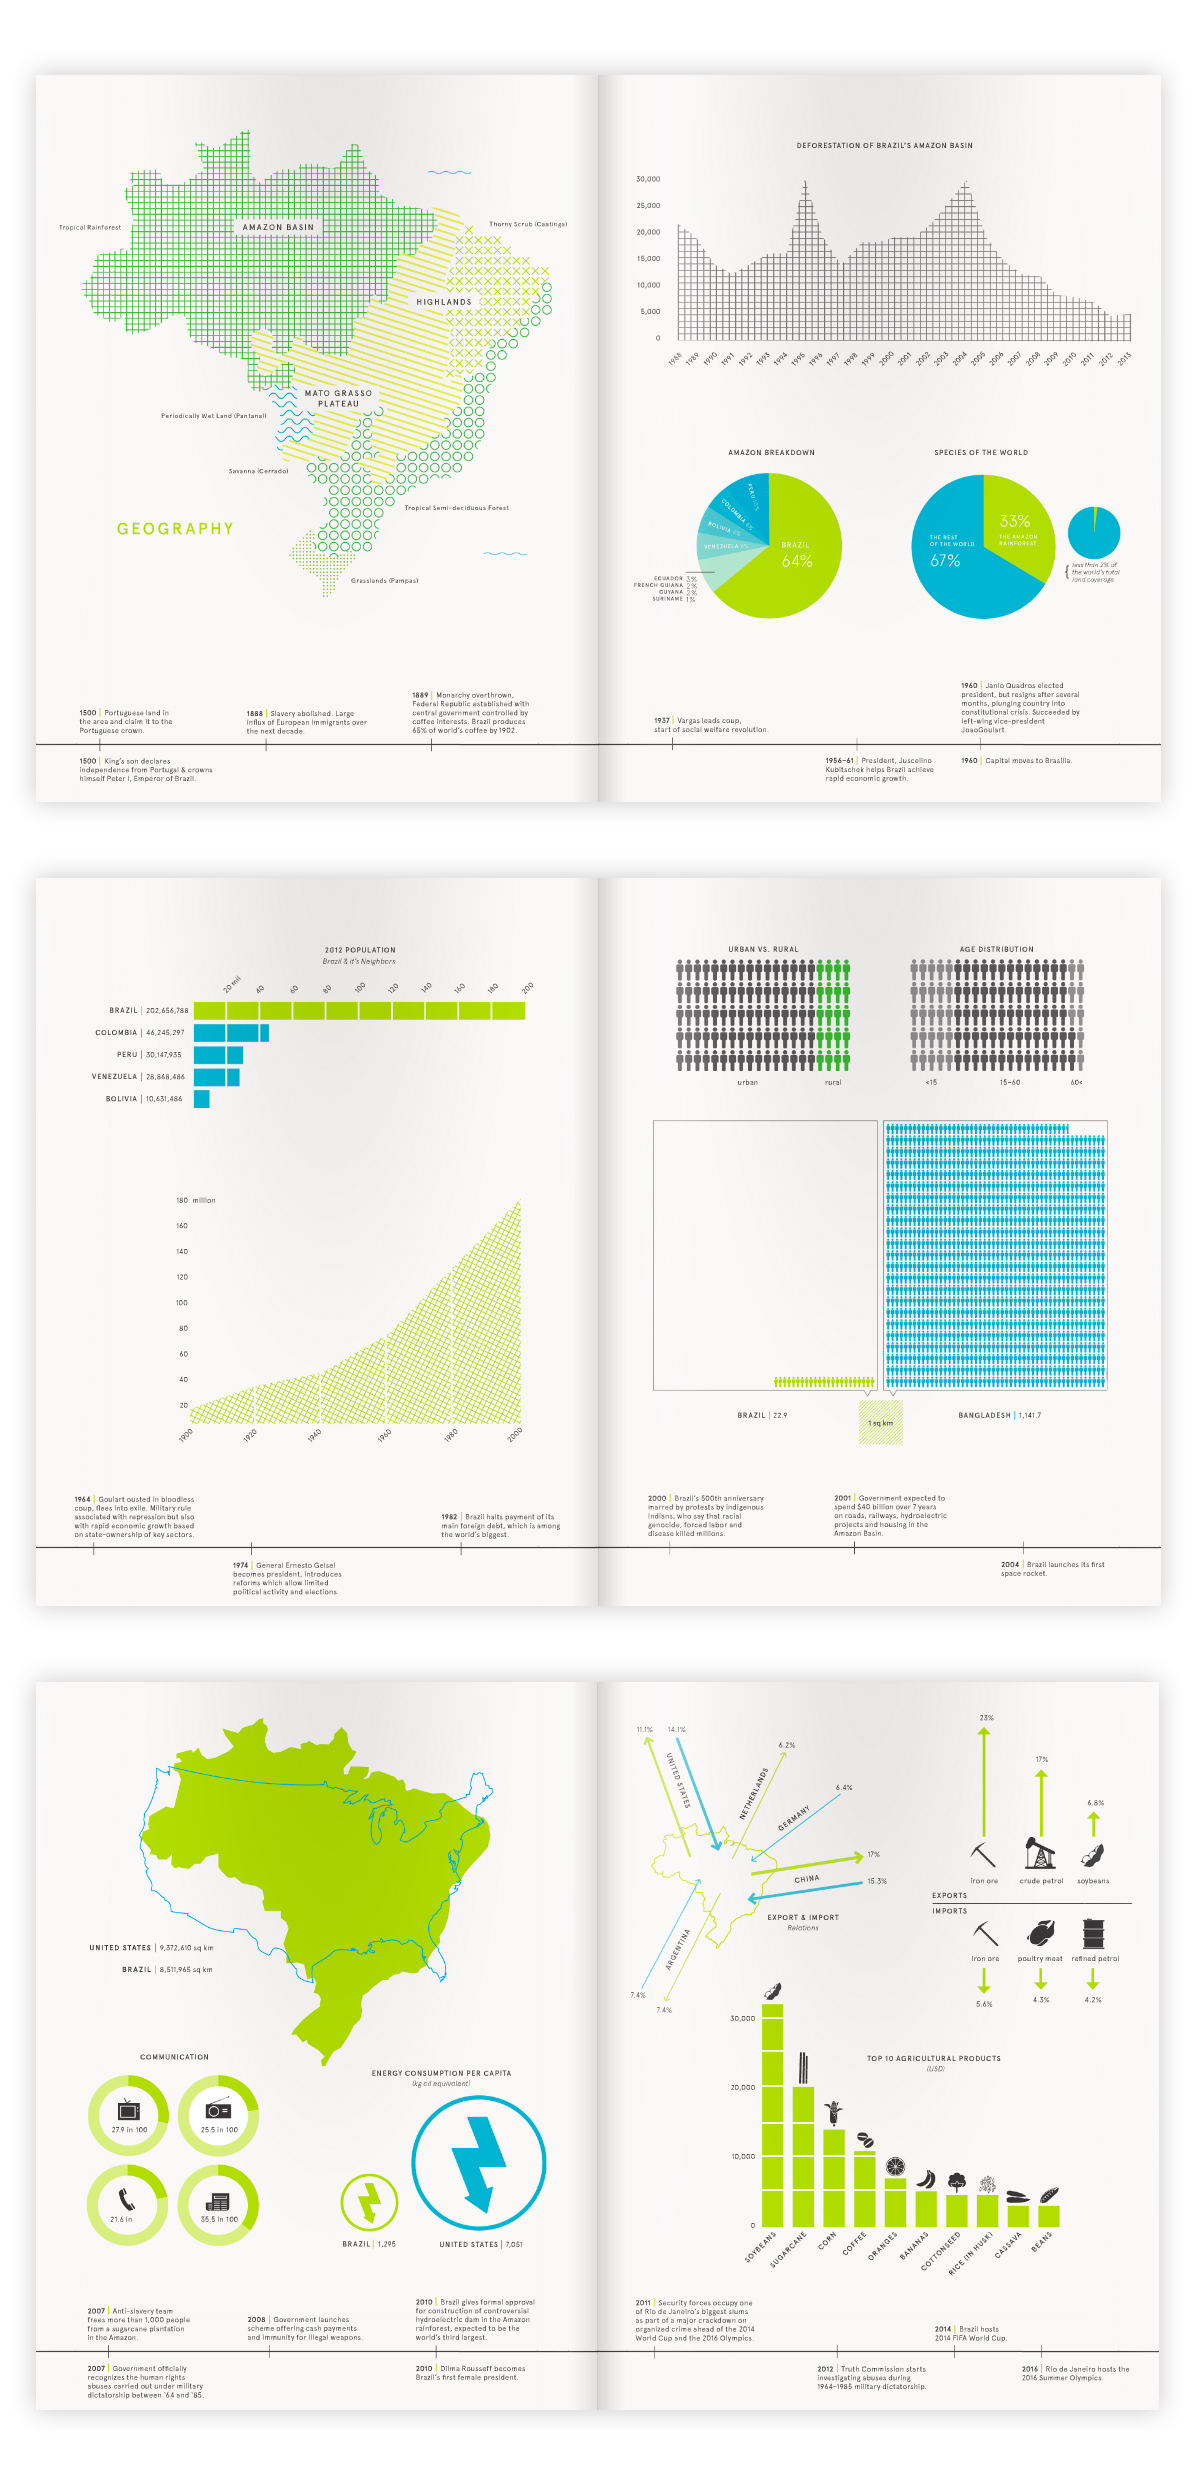 infographics information design Mapping map Brazil South America population density imports EXPORTS Amazon Rainforest chart graph Booklet risd